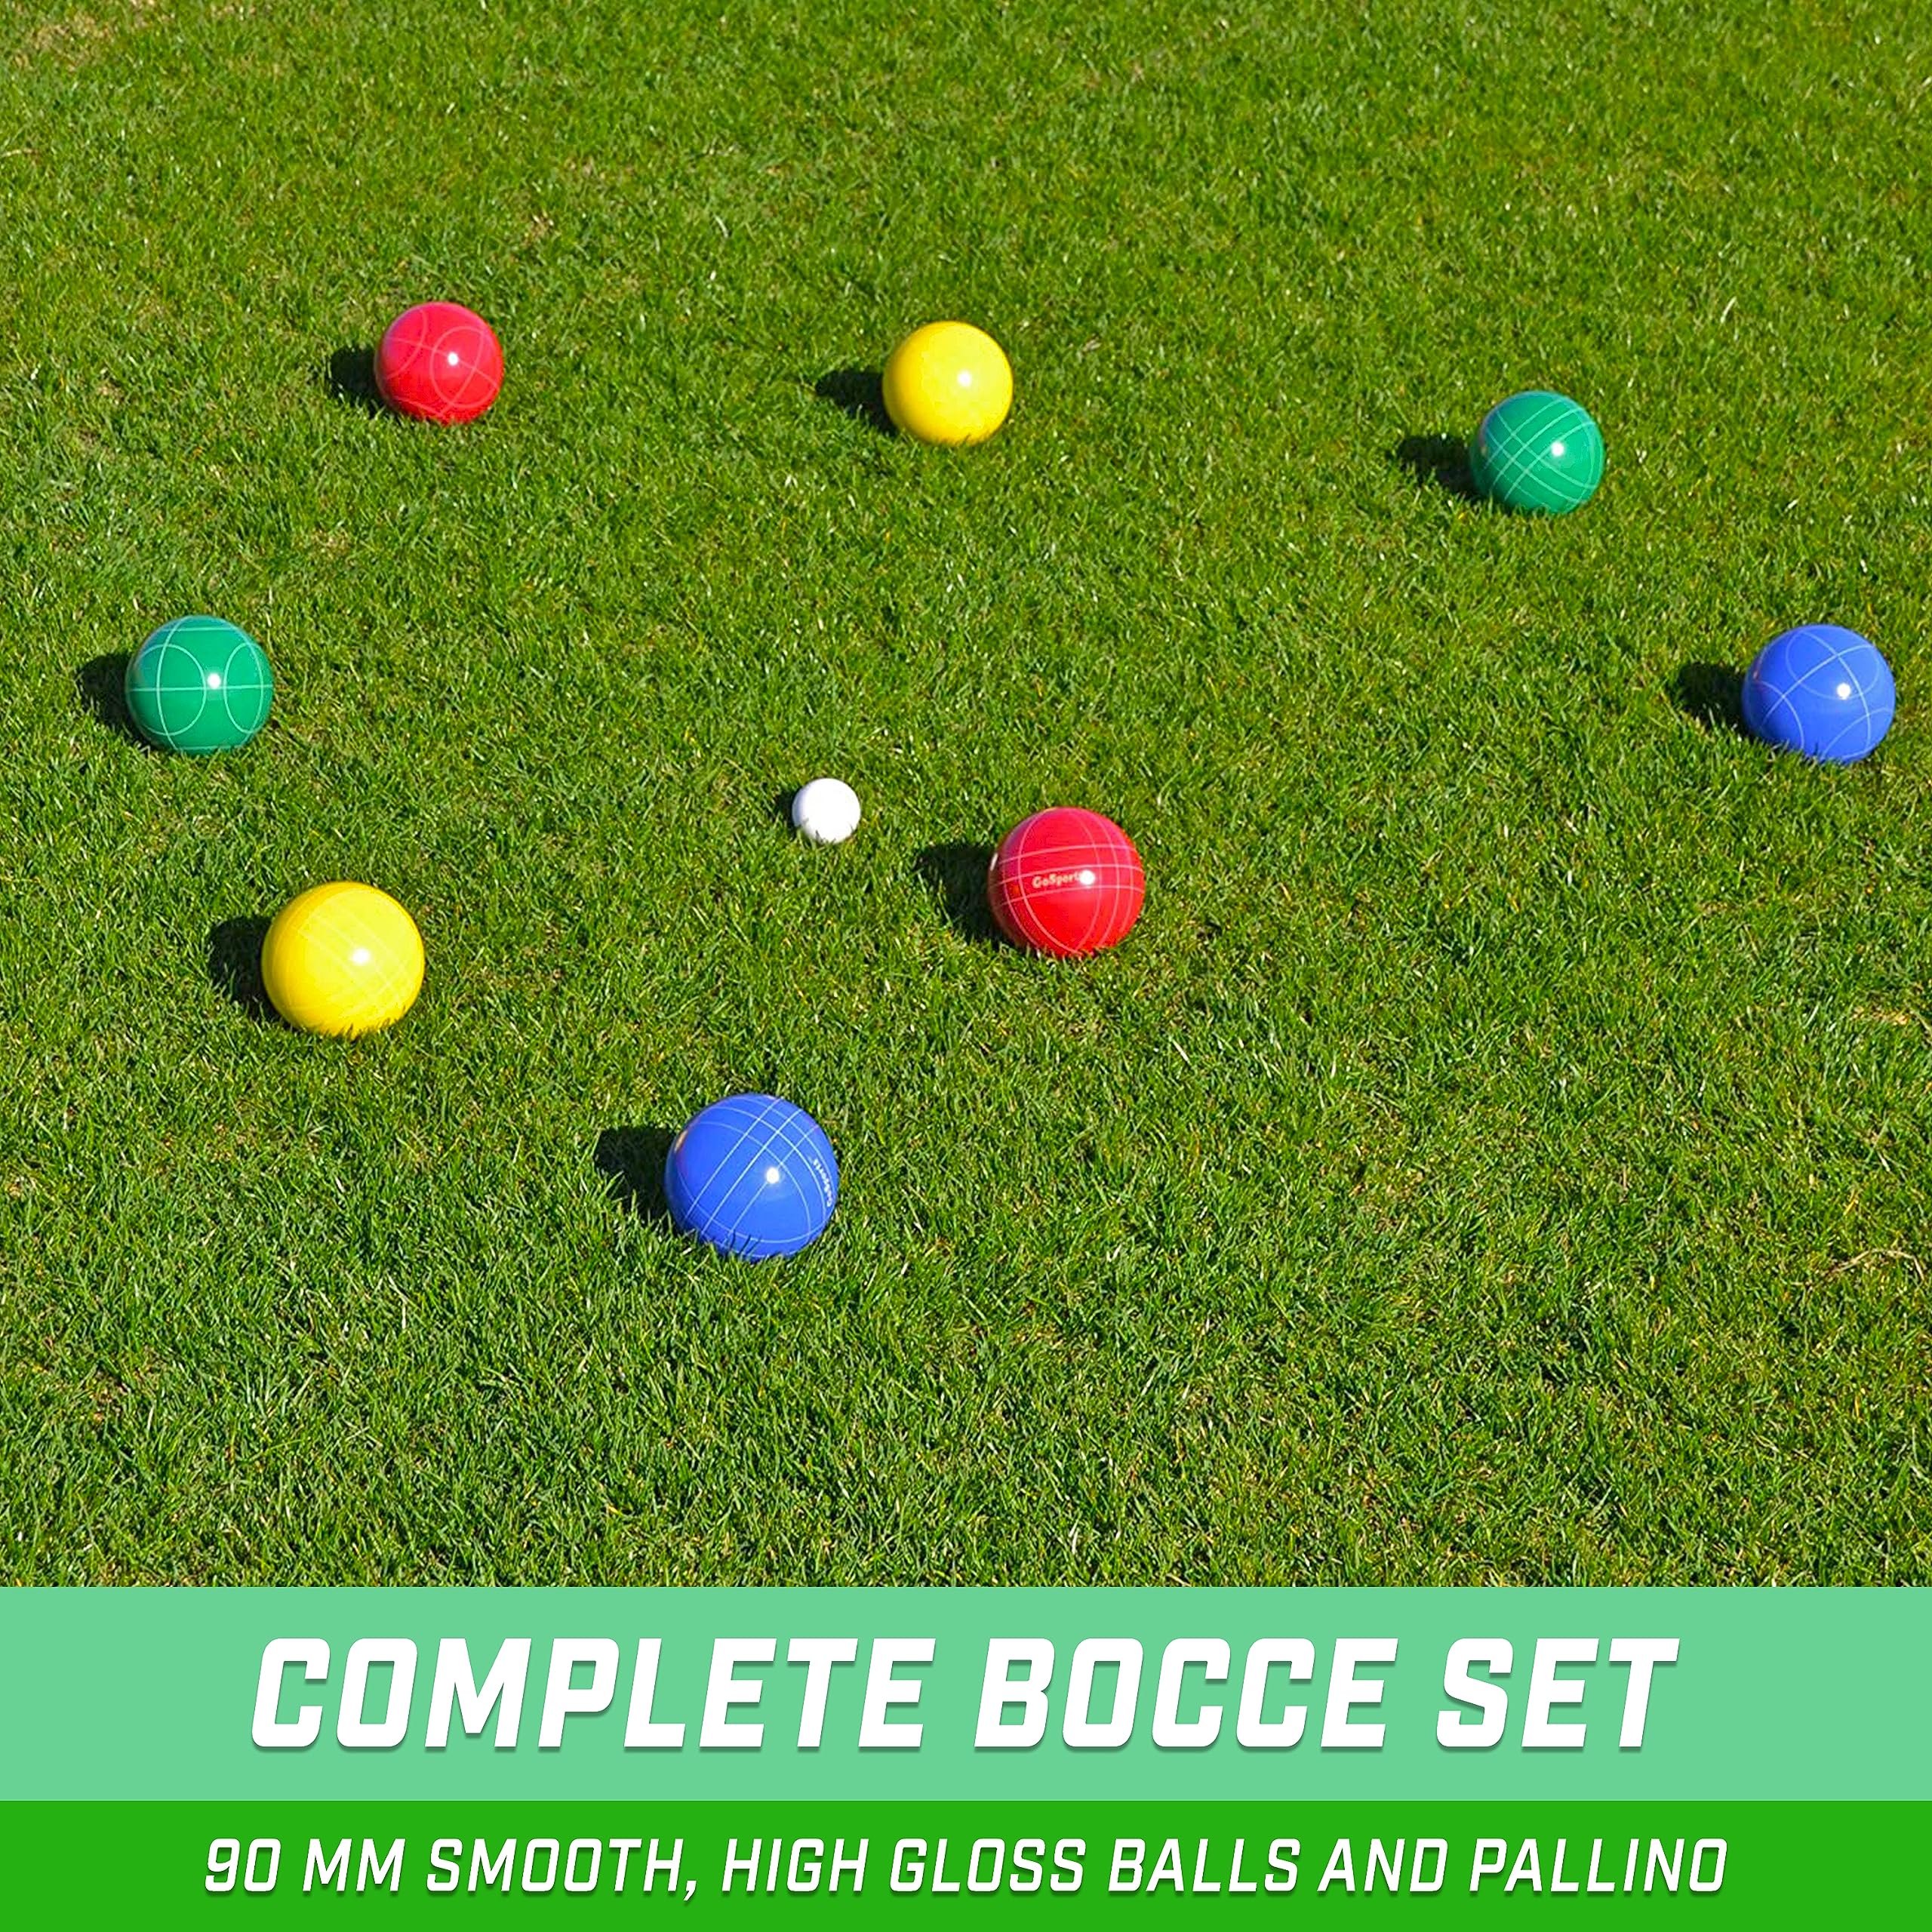 GoSports 90mm Soft Bocce Set Includes 8 Weighted Balls, Pallino and Case, Play Indoors or Outdoors